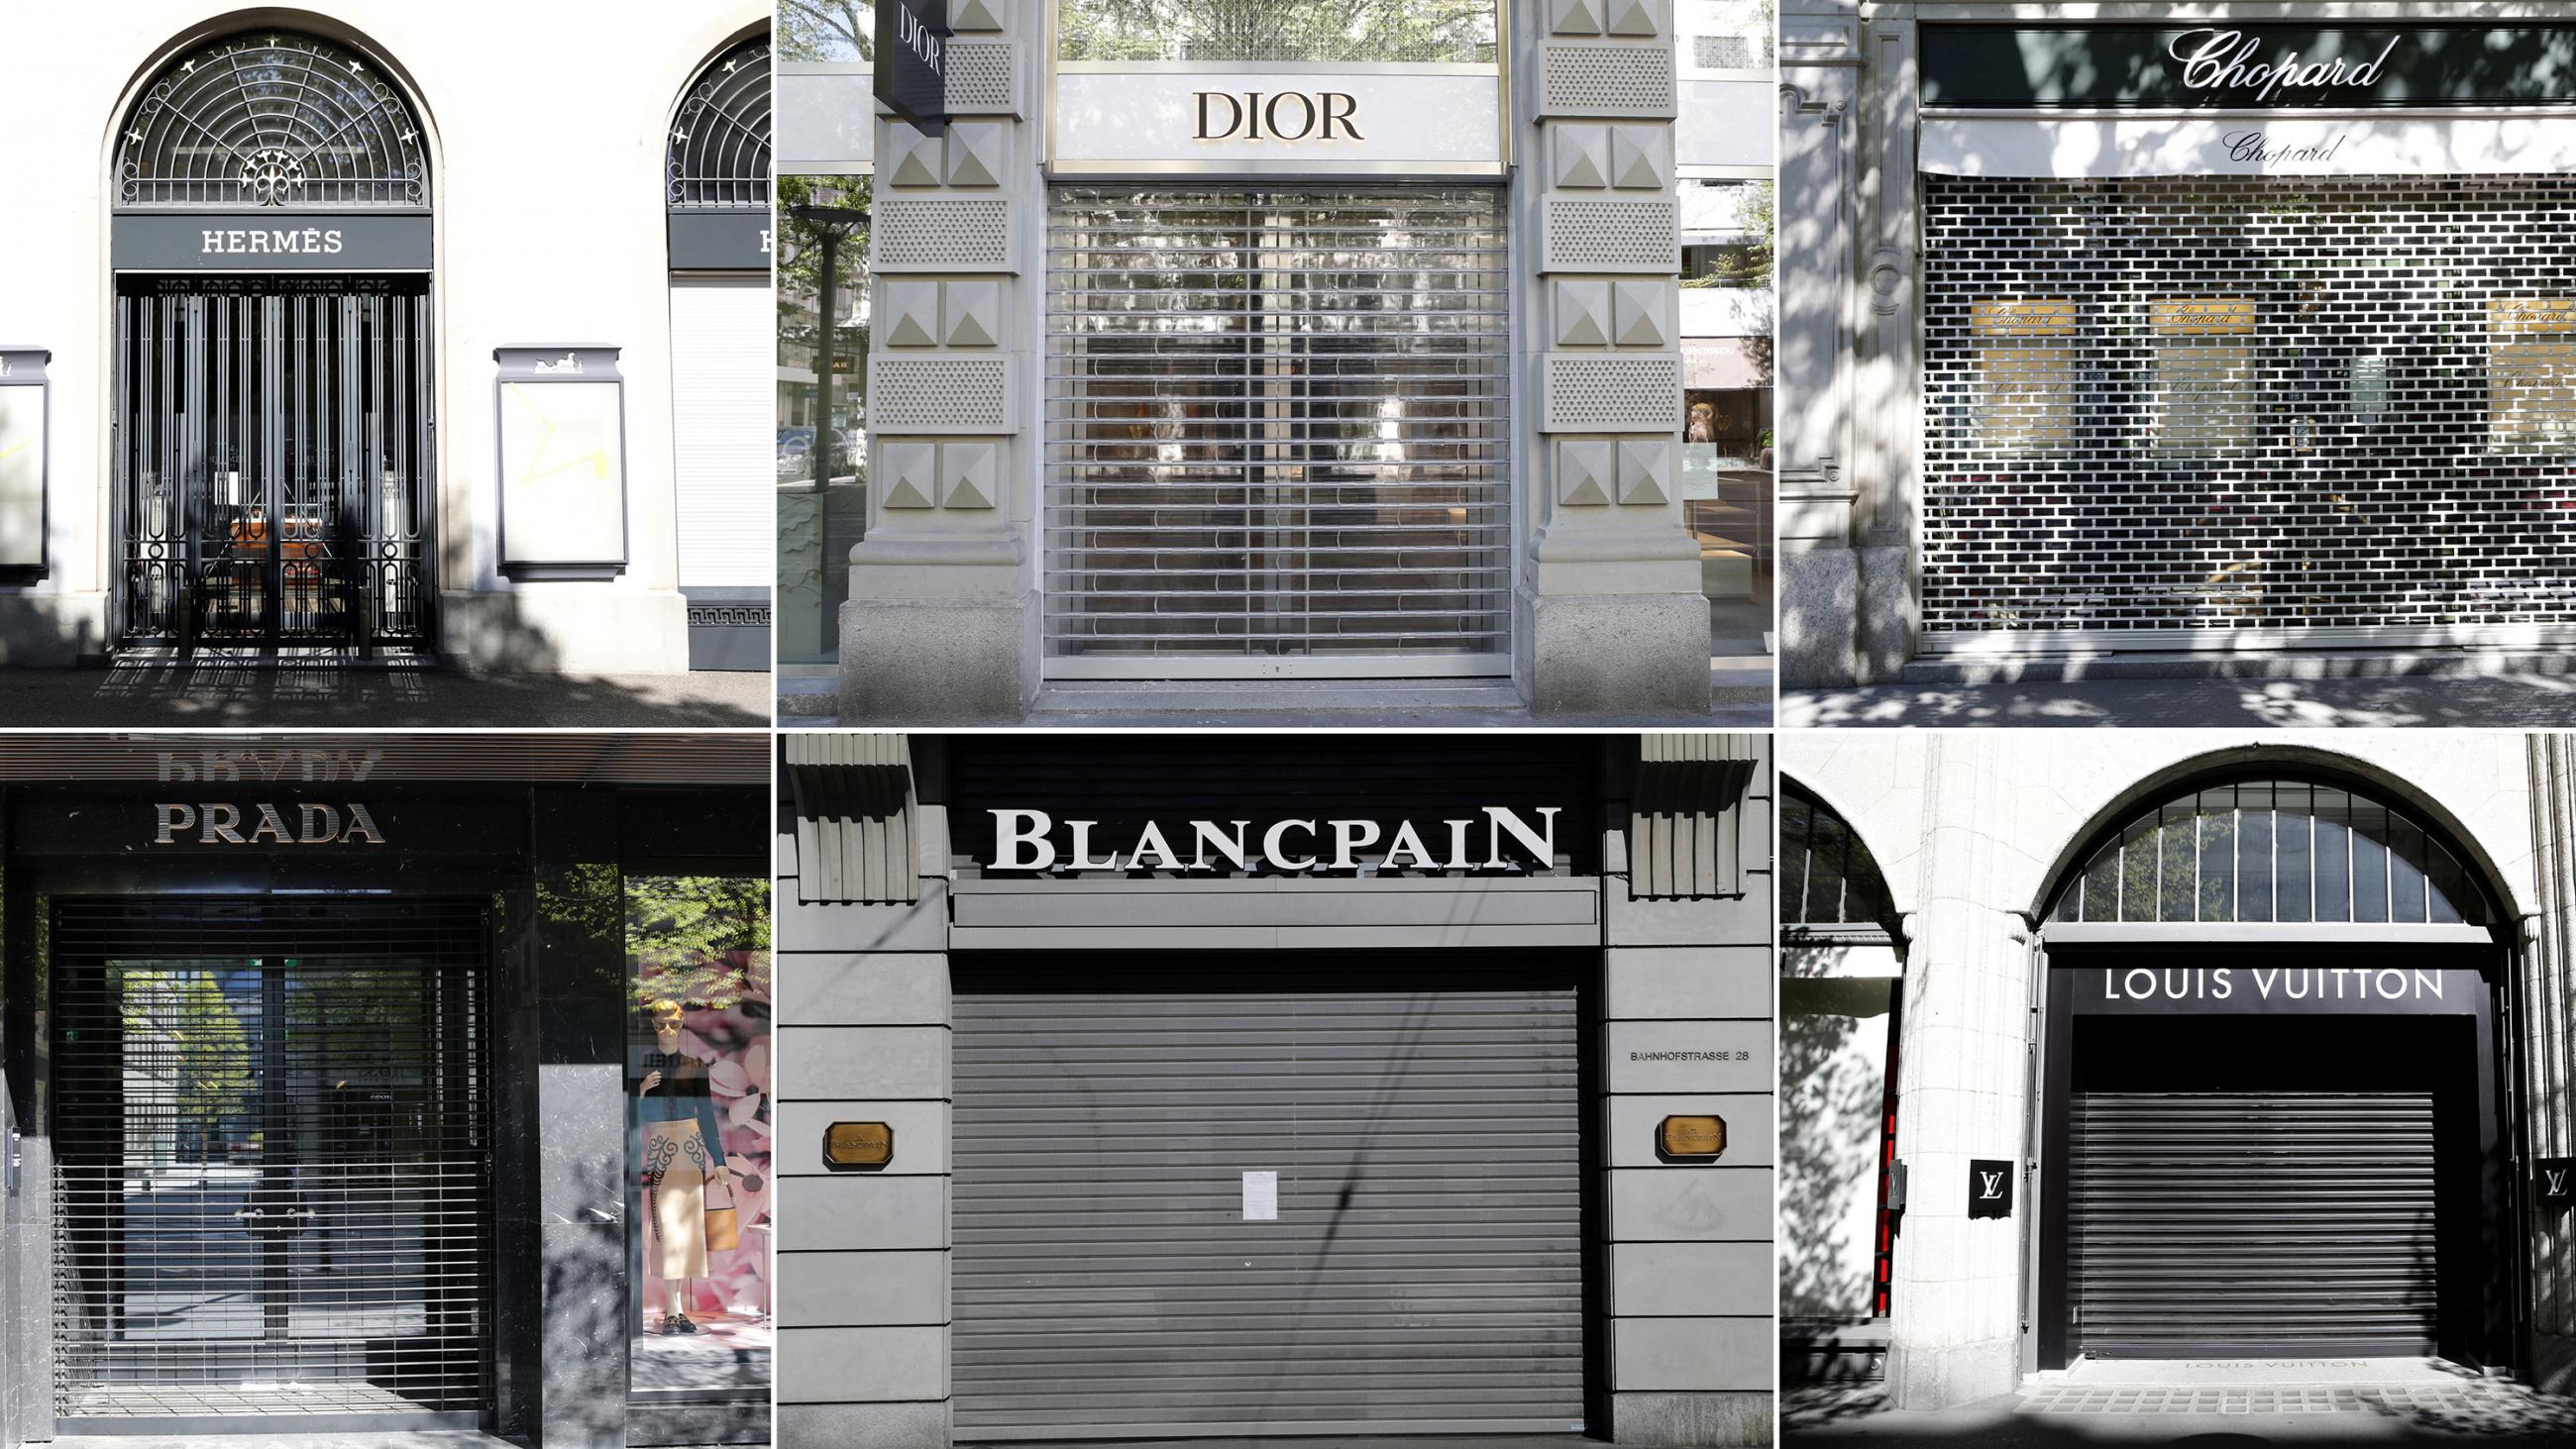 The picture shows from the closed-up front of shops like Cartier, Chanel, Harry Winston, Hermes, Dior, Chopard, Prada, Blancpain and Louis Vuitton. 